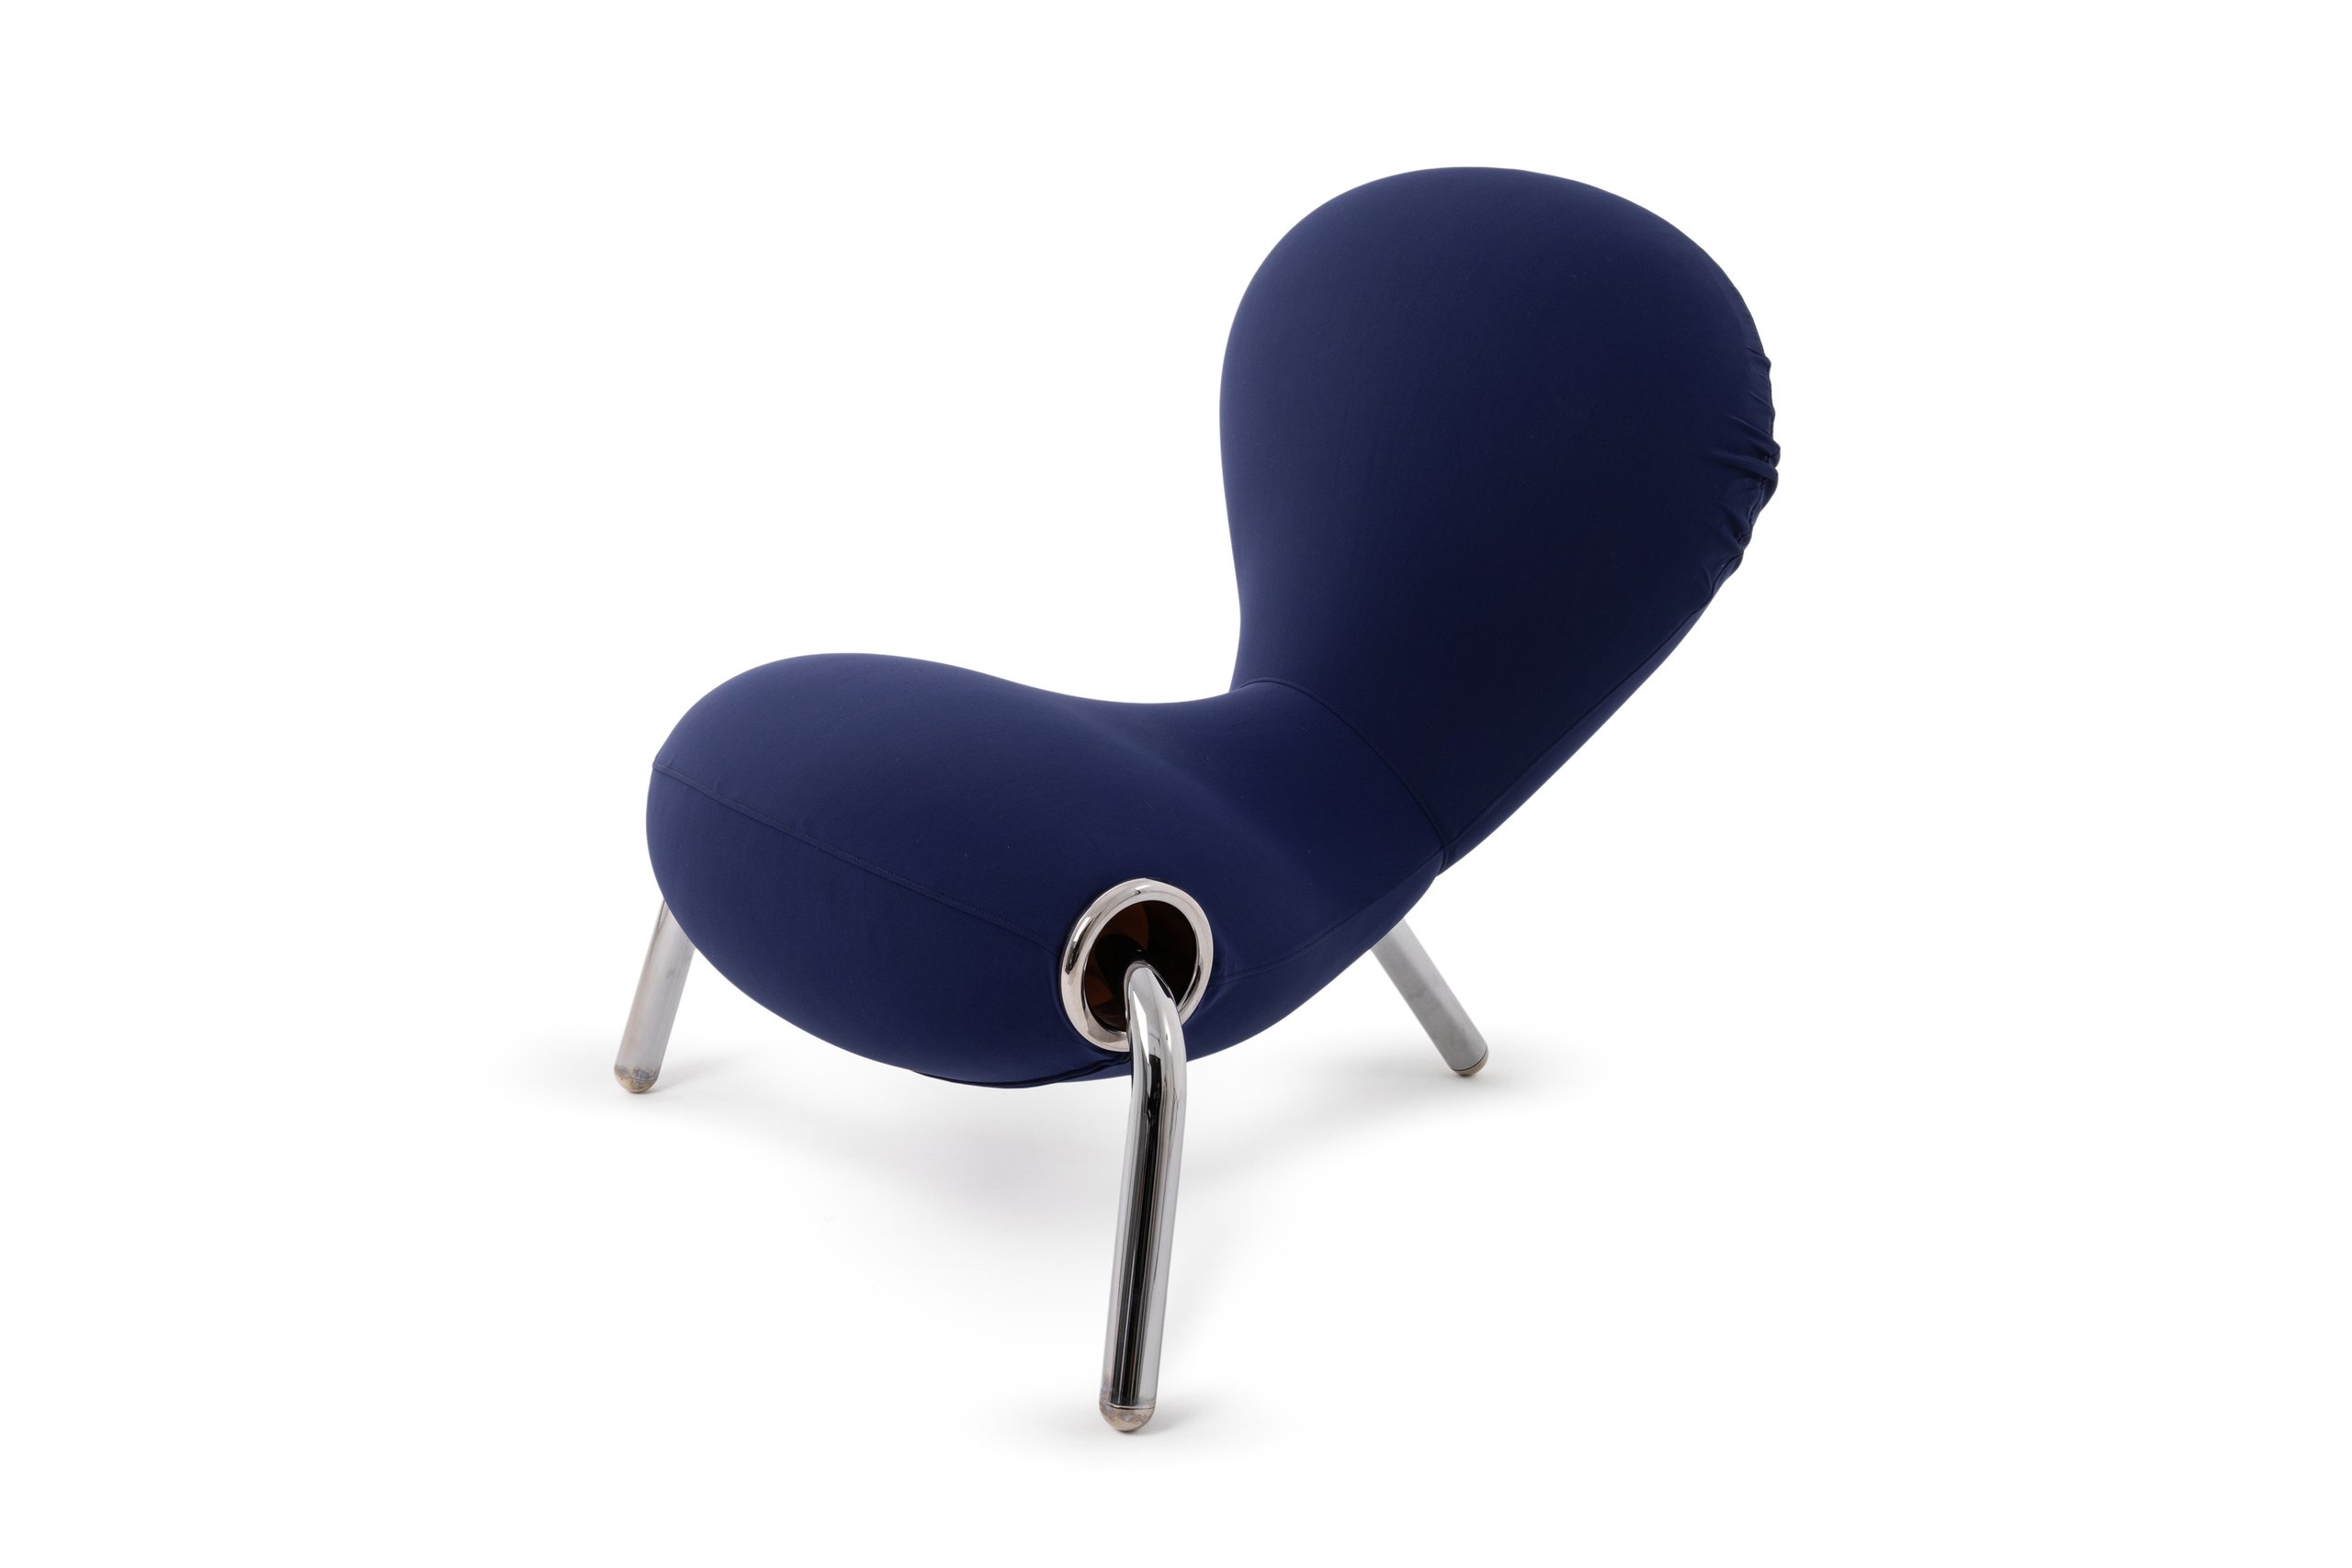 'Embryo' chair by Marc Newson